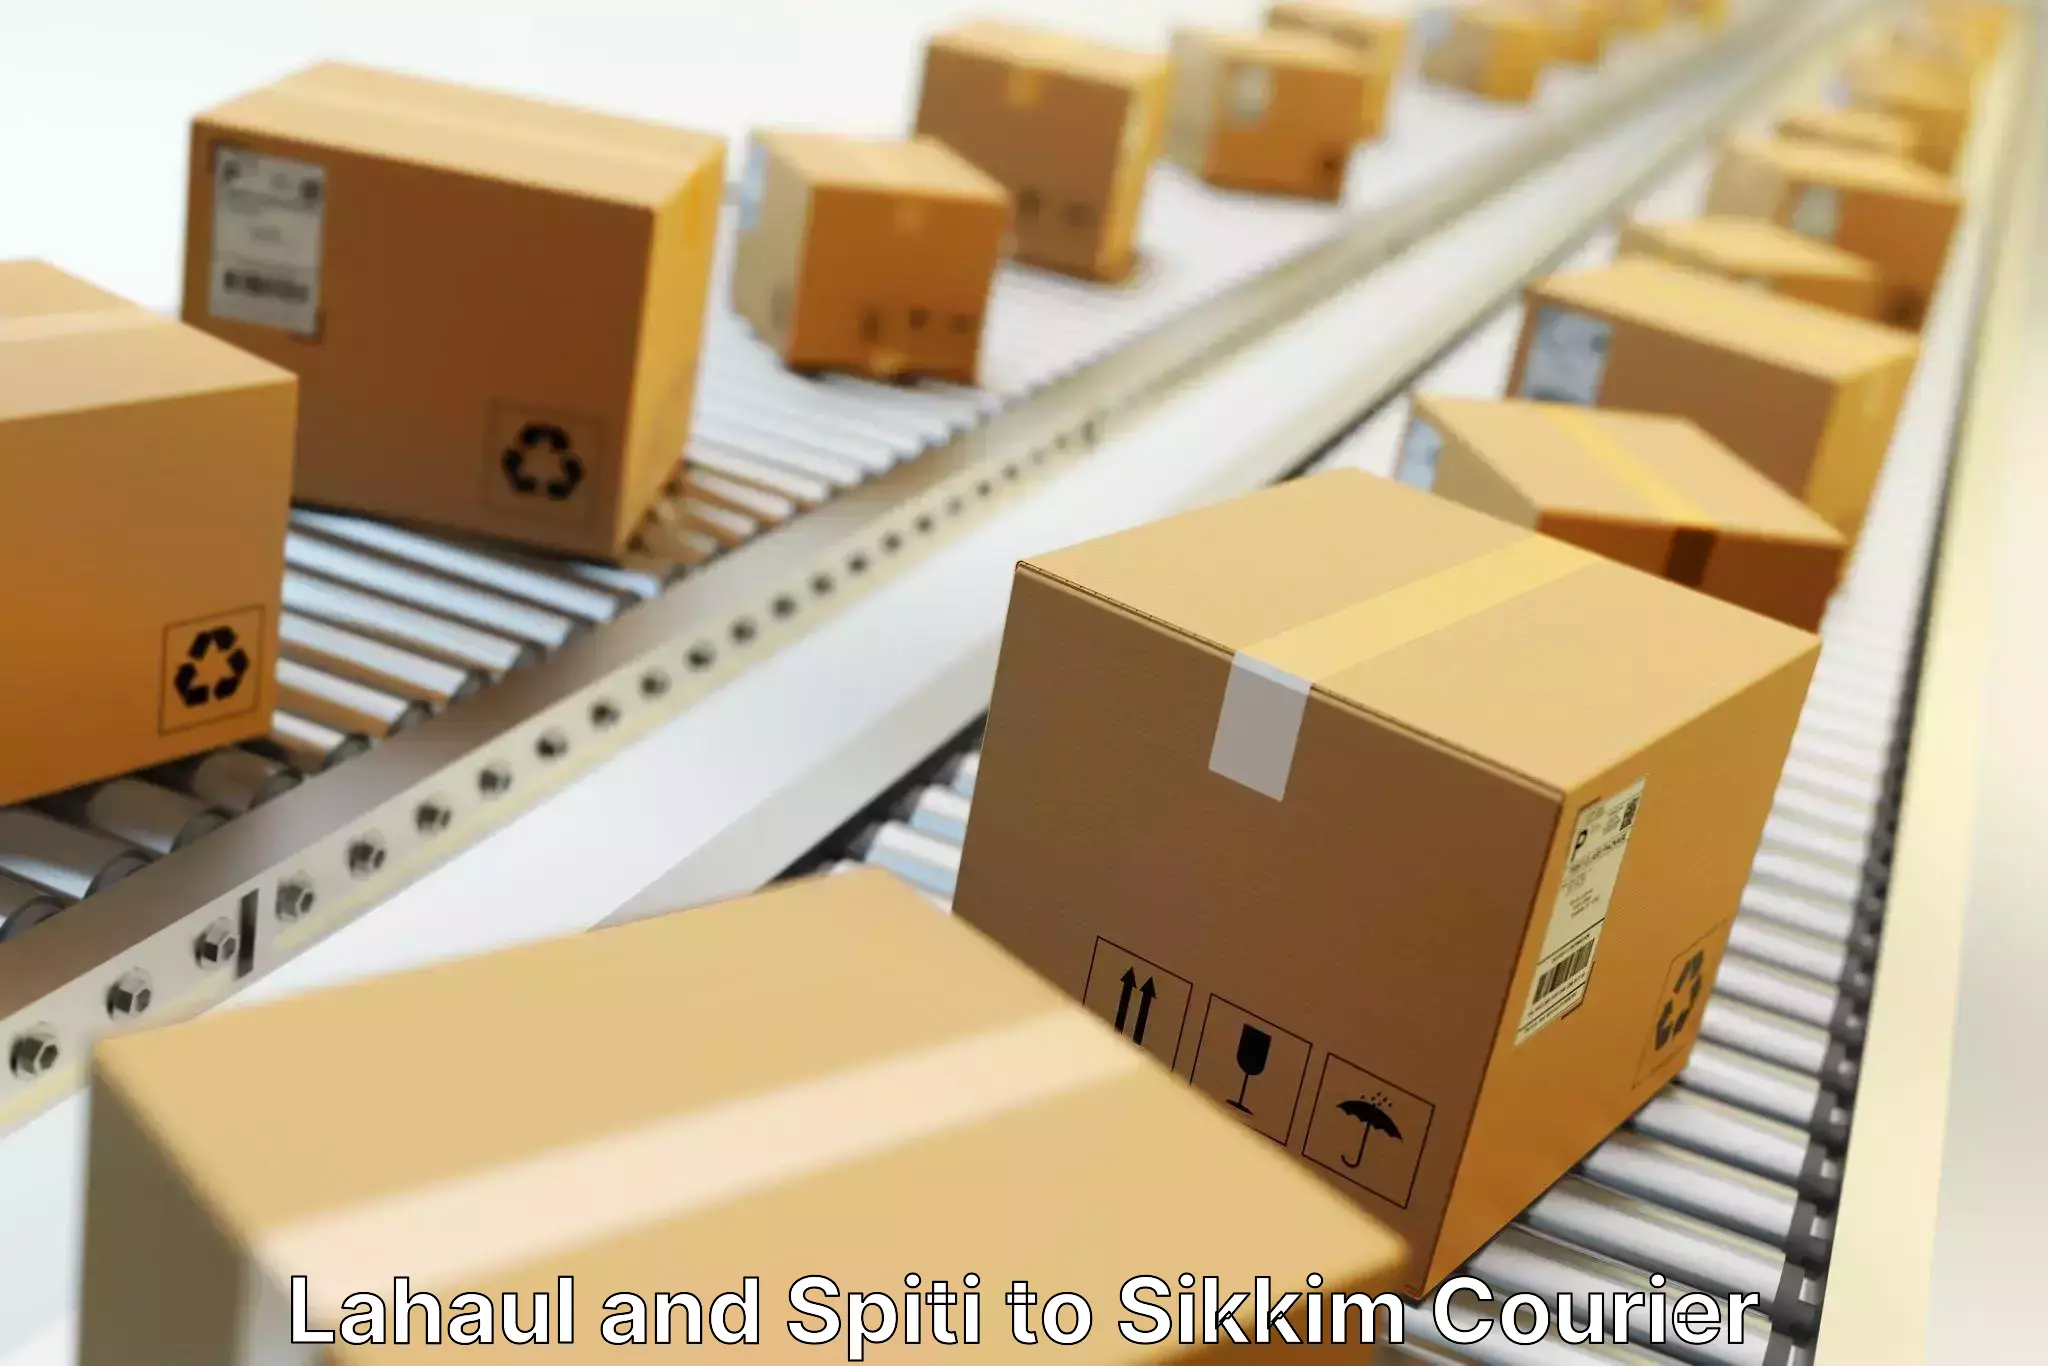 Efficient order fulfillment in Lahaul and Spiti to Sikkim